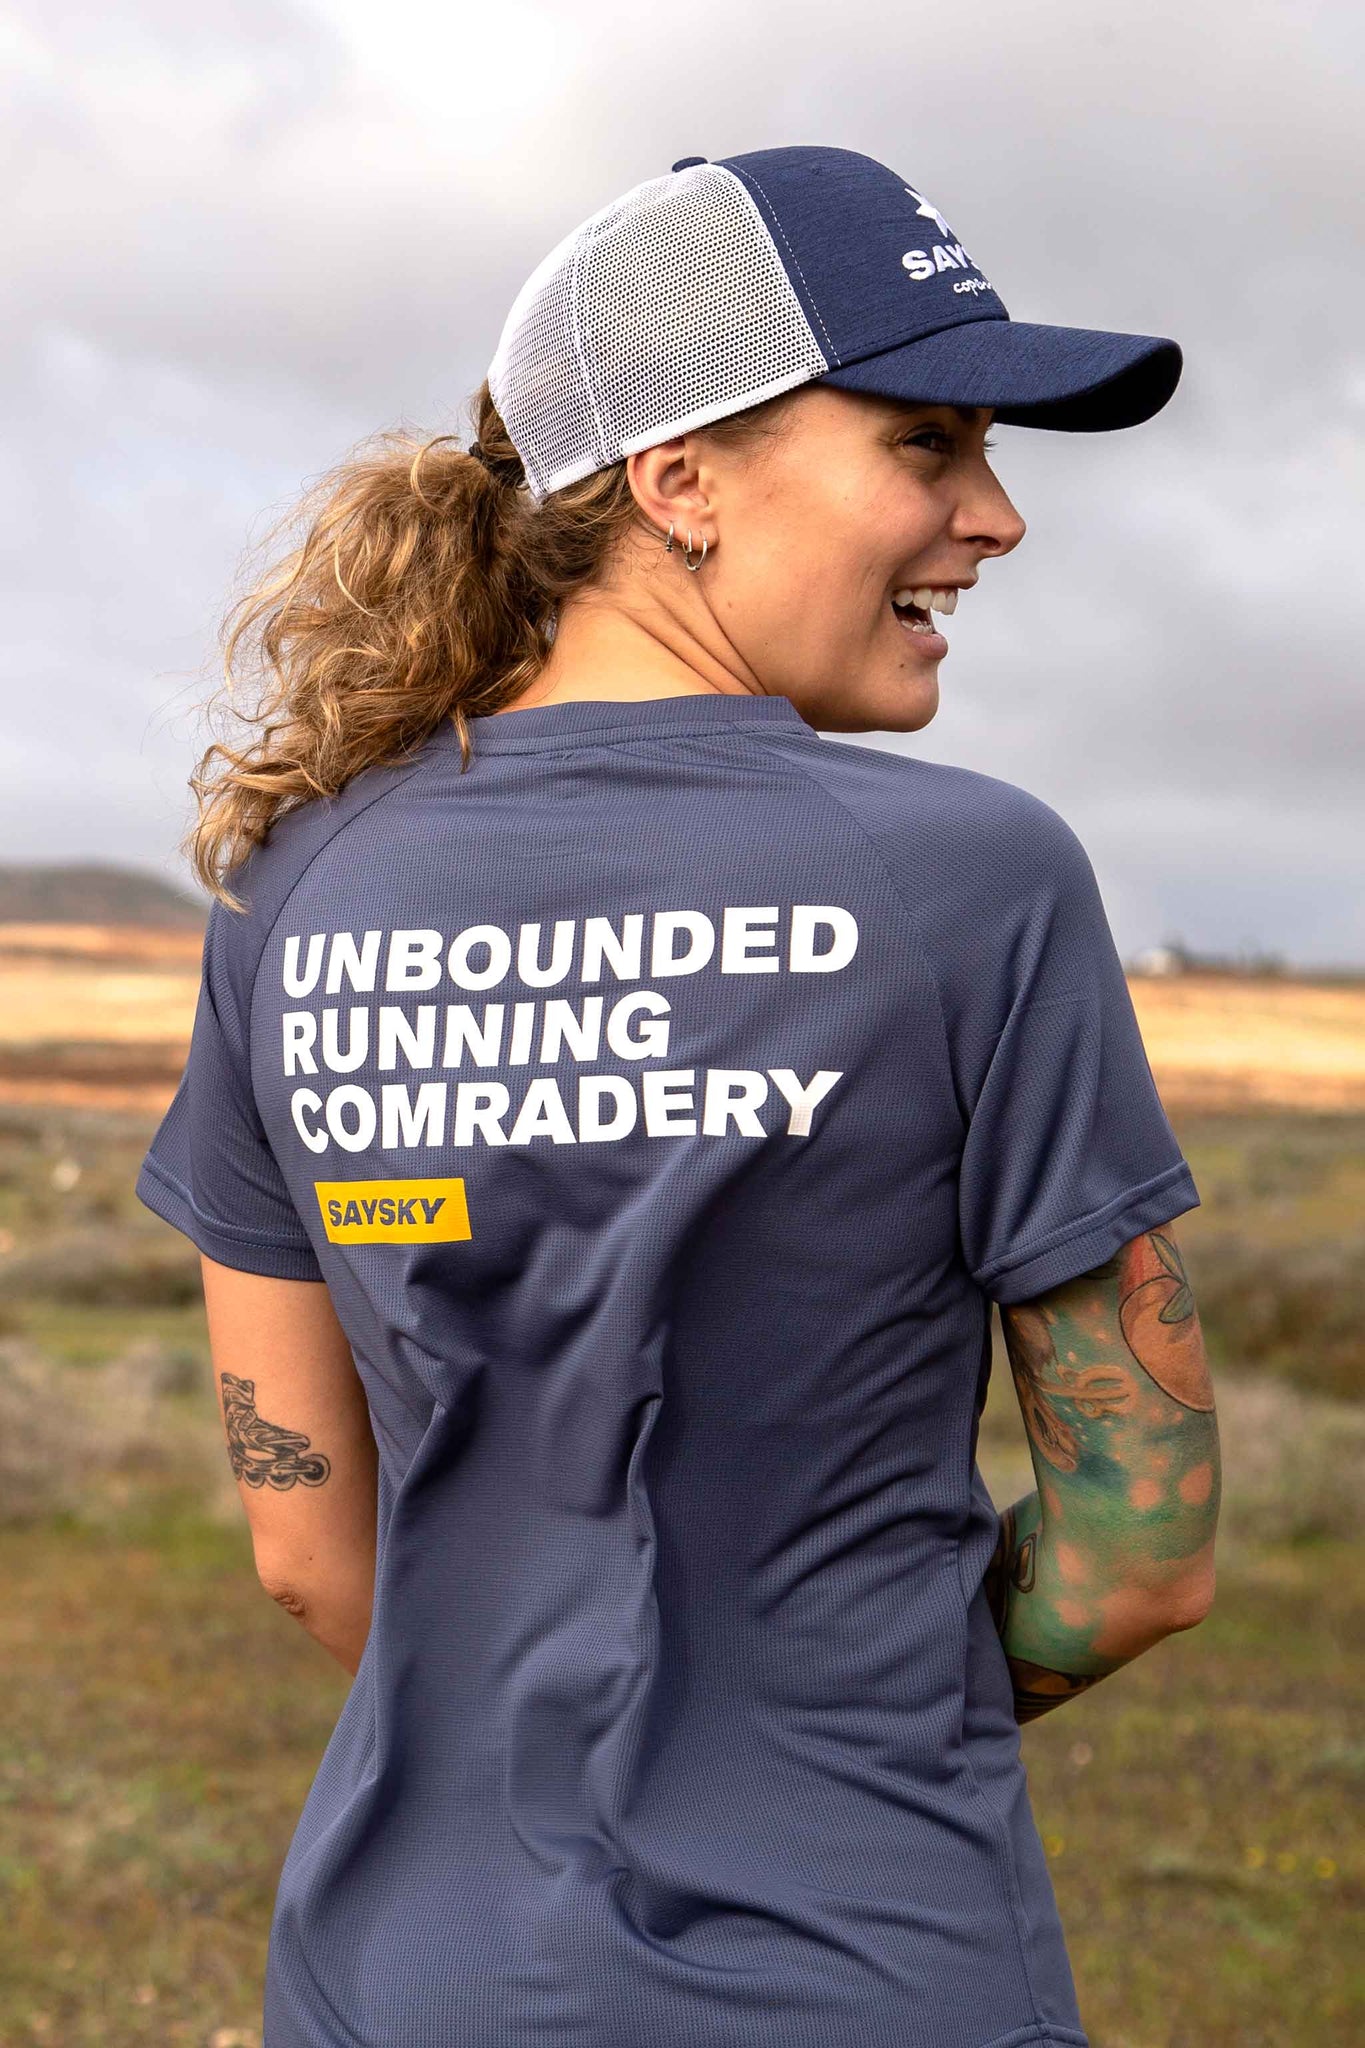 SAYSKY Unbounded Running Comradery